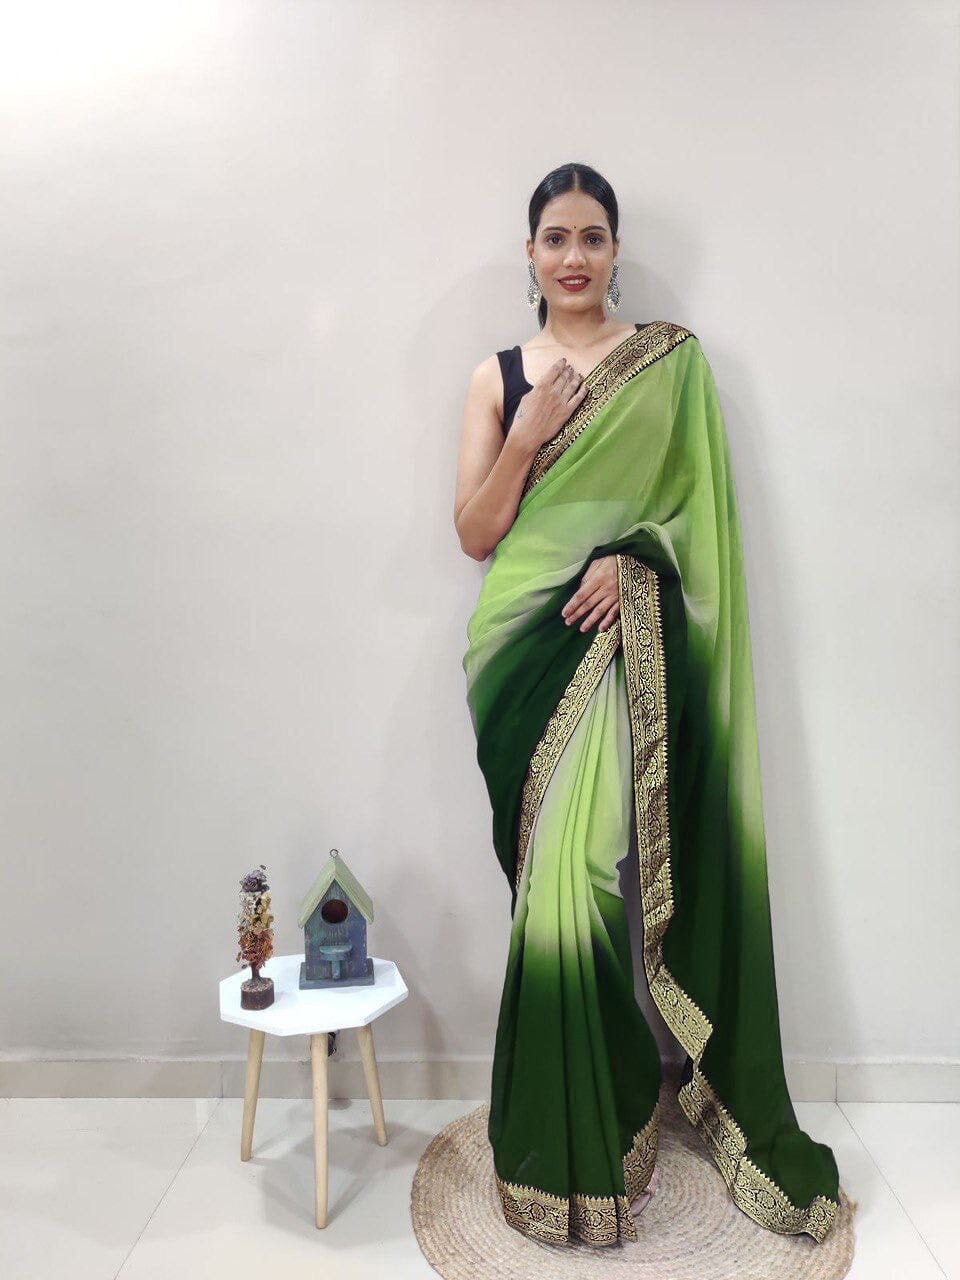 Green Georgette Multicolor Ready to Wear Saree and Banglori Blouse Ready to Wear Saree Shopin Di Apparels 